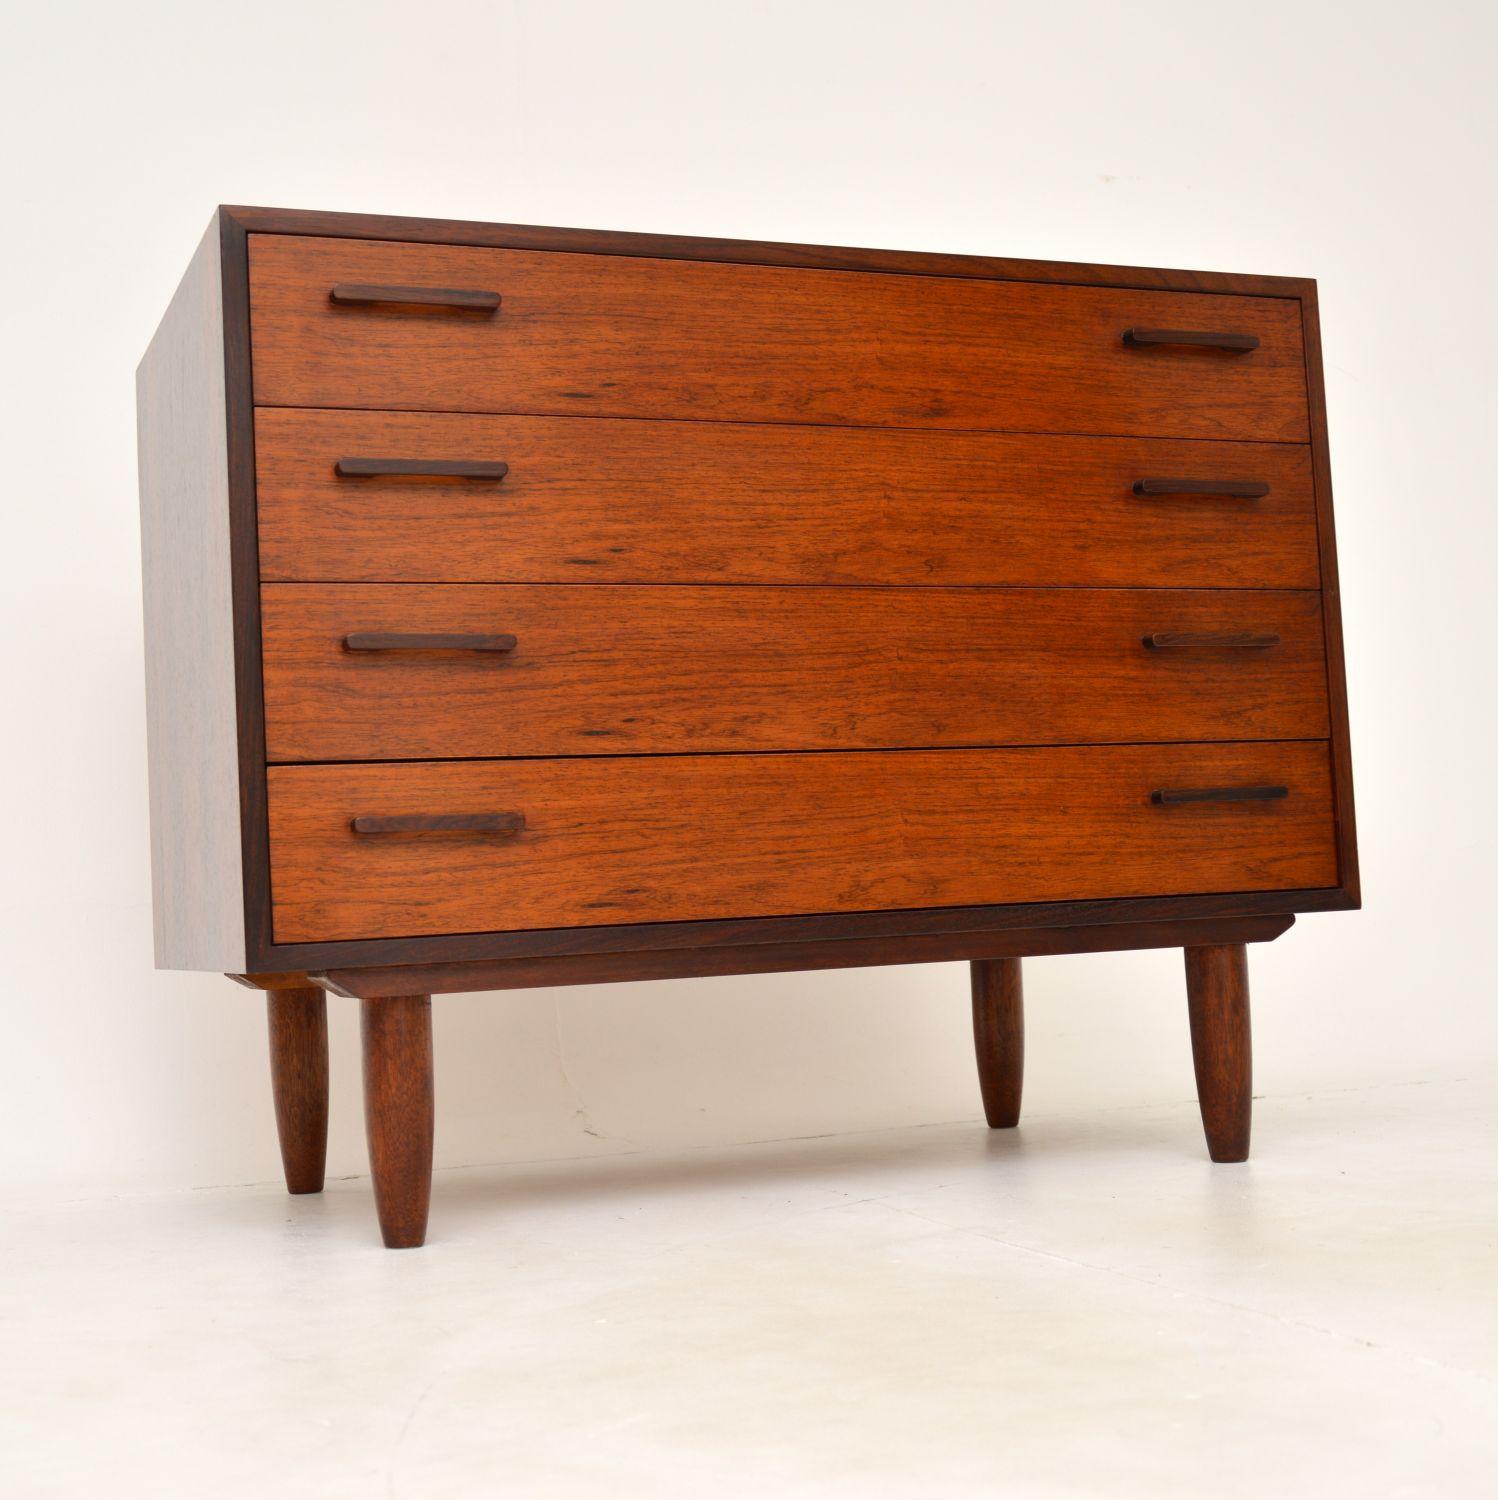 A gorgeous vintage Danish chest of drawers. This was designed by Kai Kristiansen, it was made in Denmark in the 1960’s.

It is of superb quality, with a very stylish and practical design. The colour and wood grain patterns are beautiful, this